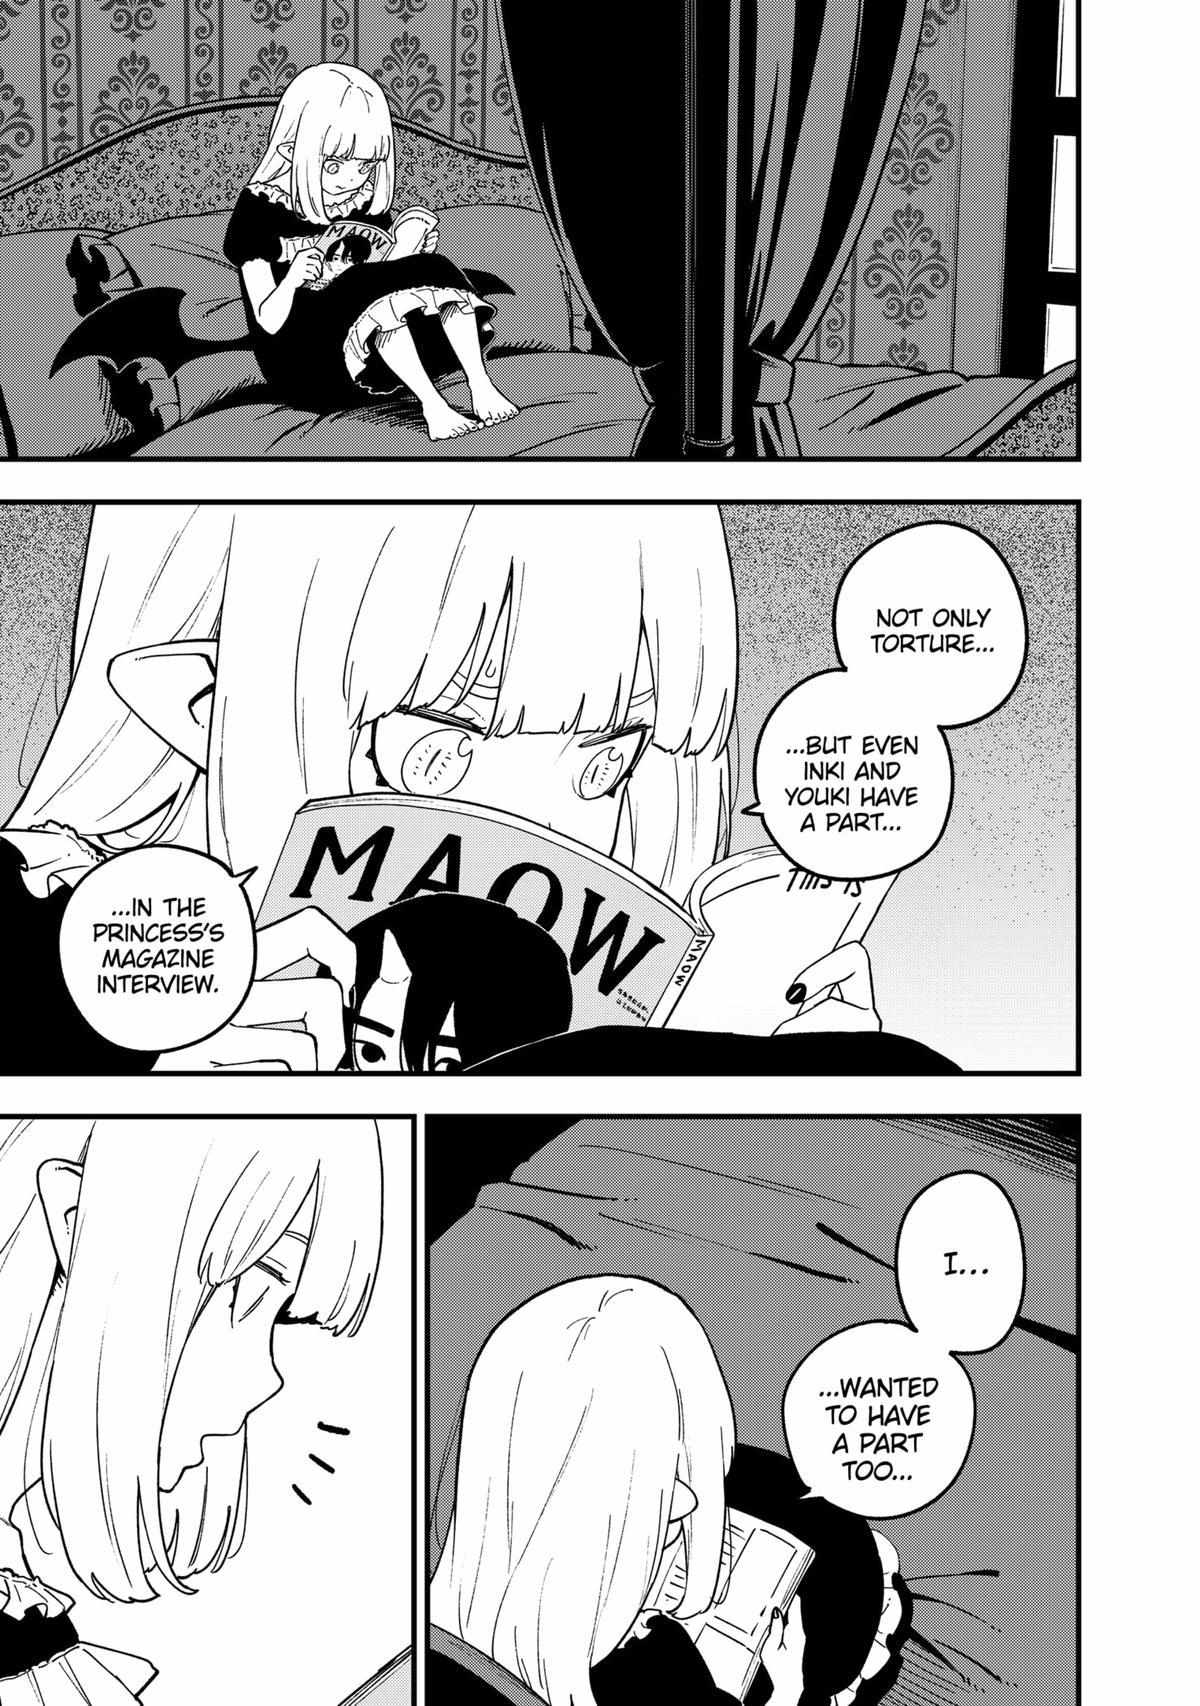 It's Time for "Interrogation", Princess! - chapter 196 - #5